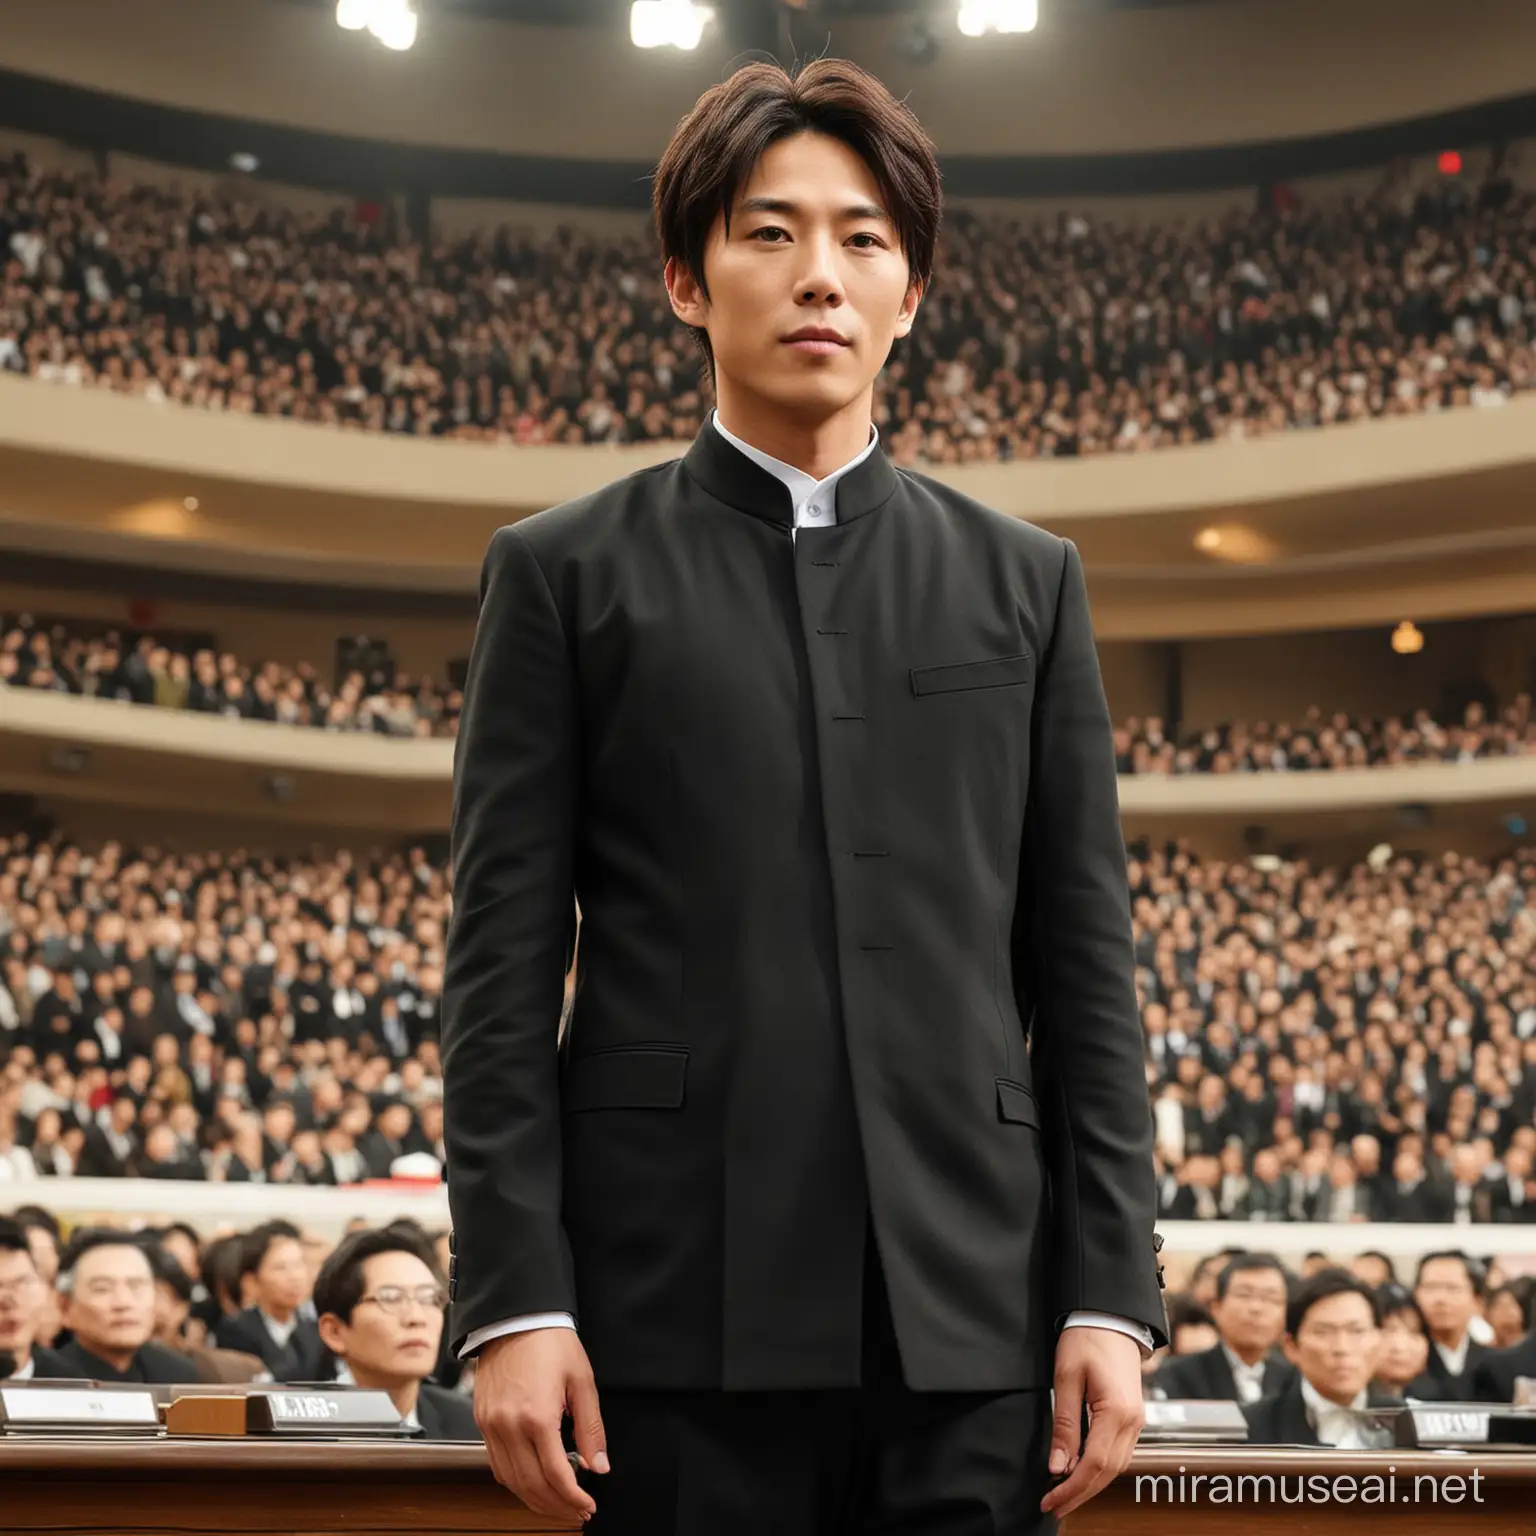 Takeru Sato Handsome Japanese Actor in Black Mao Suit at Workers Party Congress Hall